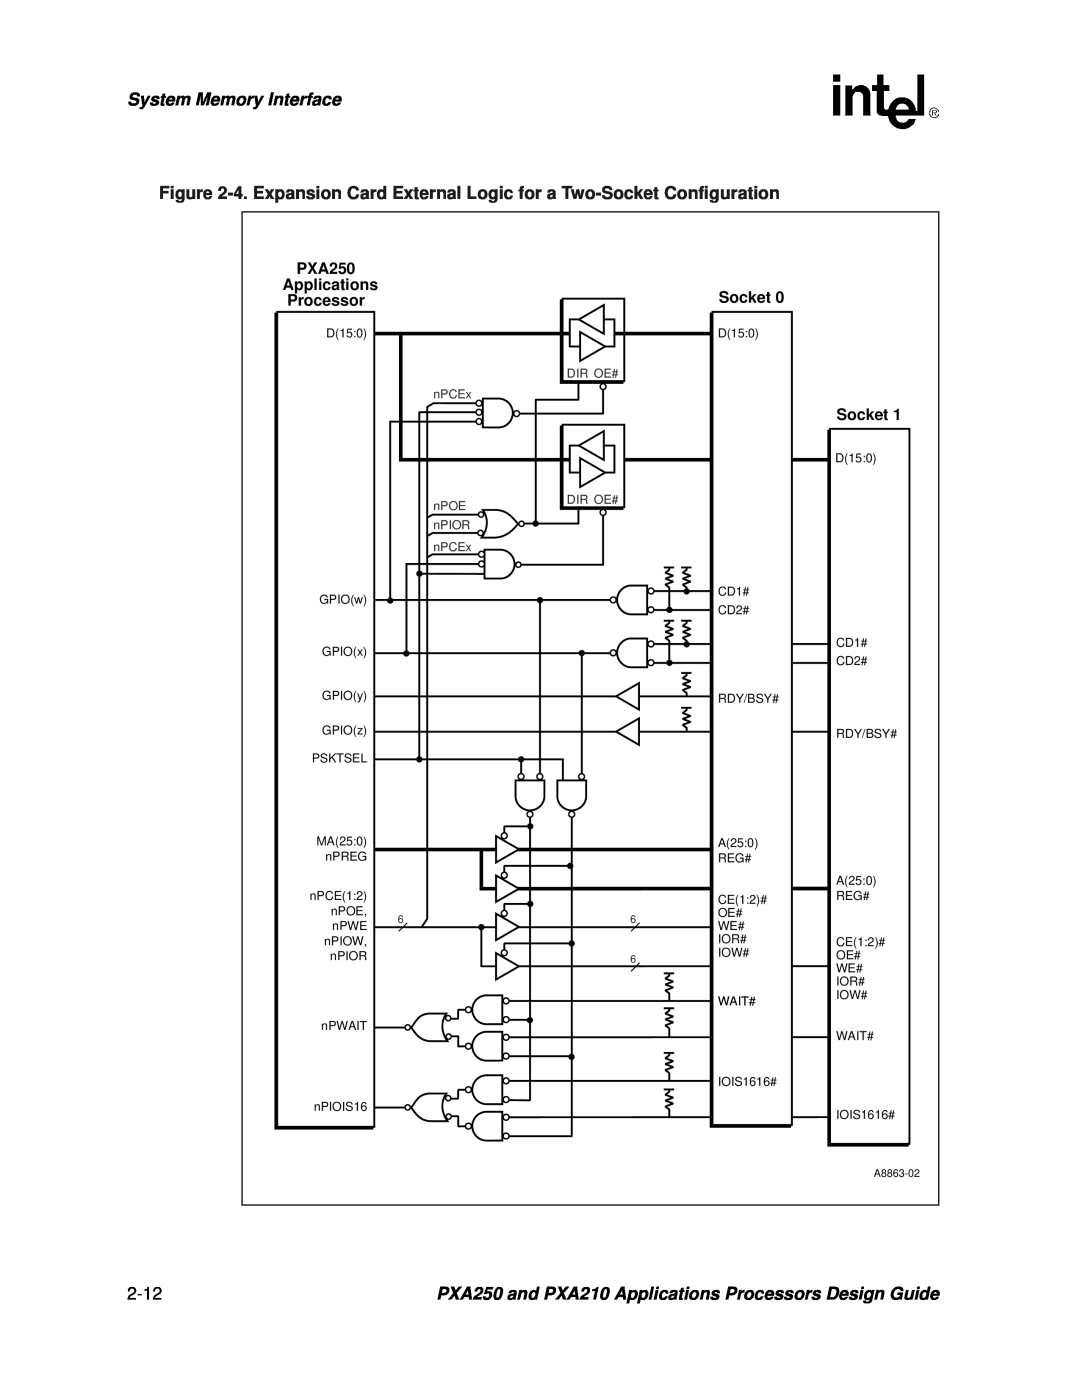 Intel System Memory Interface, PXA250 and PXA210 Applications Processors Design Guide, PXA250 Applications Processor 